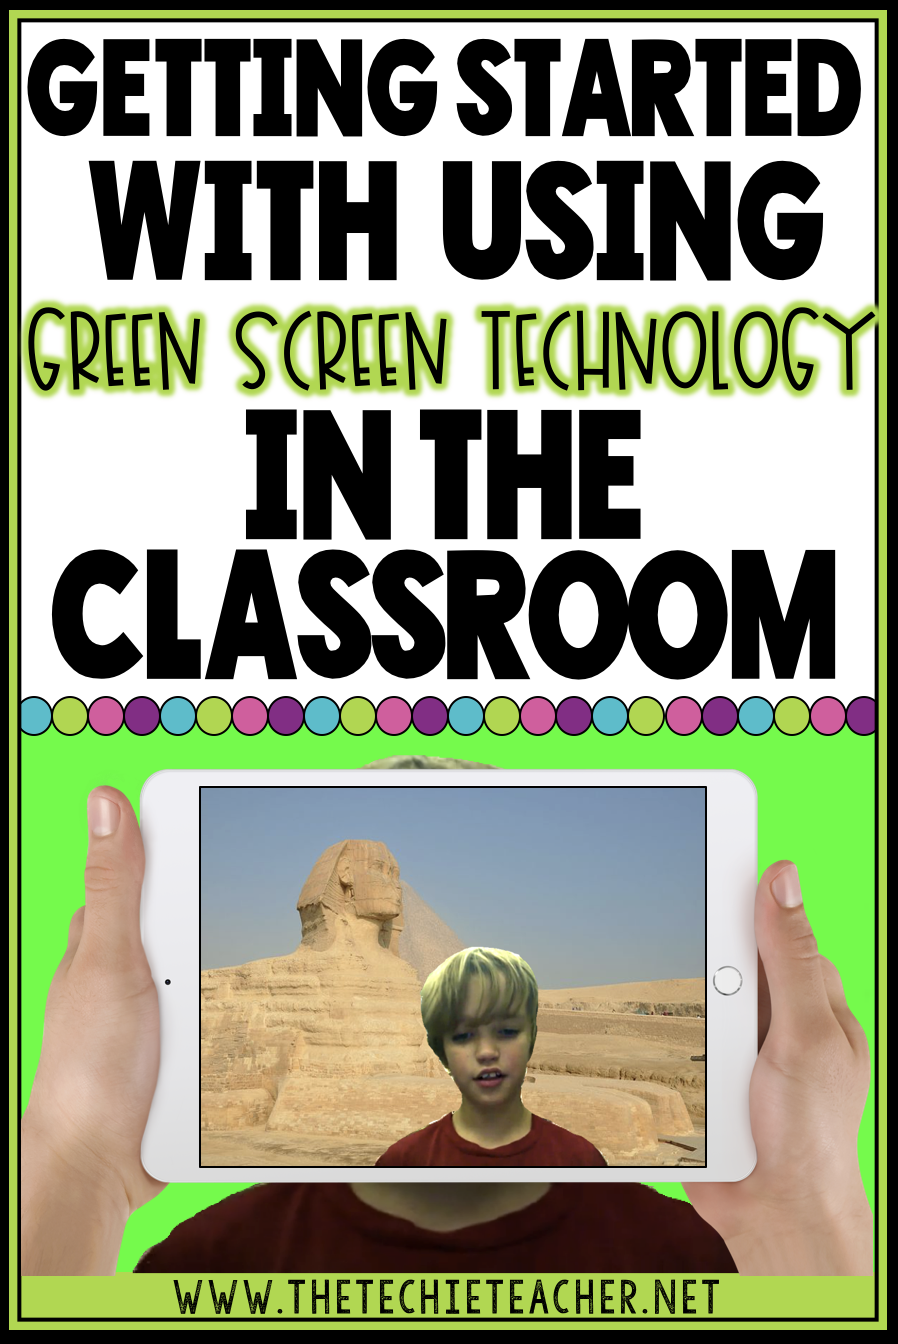 Learn how you can get started with using green screen technology in your classroom. Lots of low budget options, apps, and software are shared!